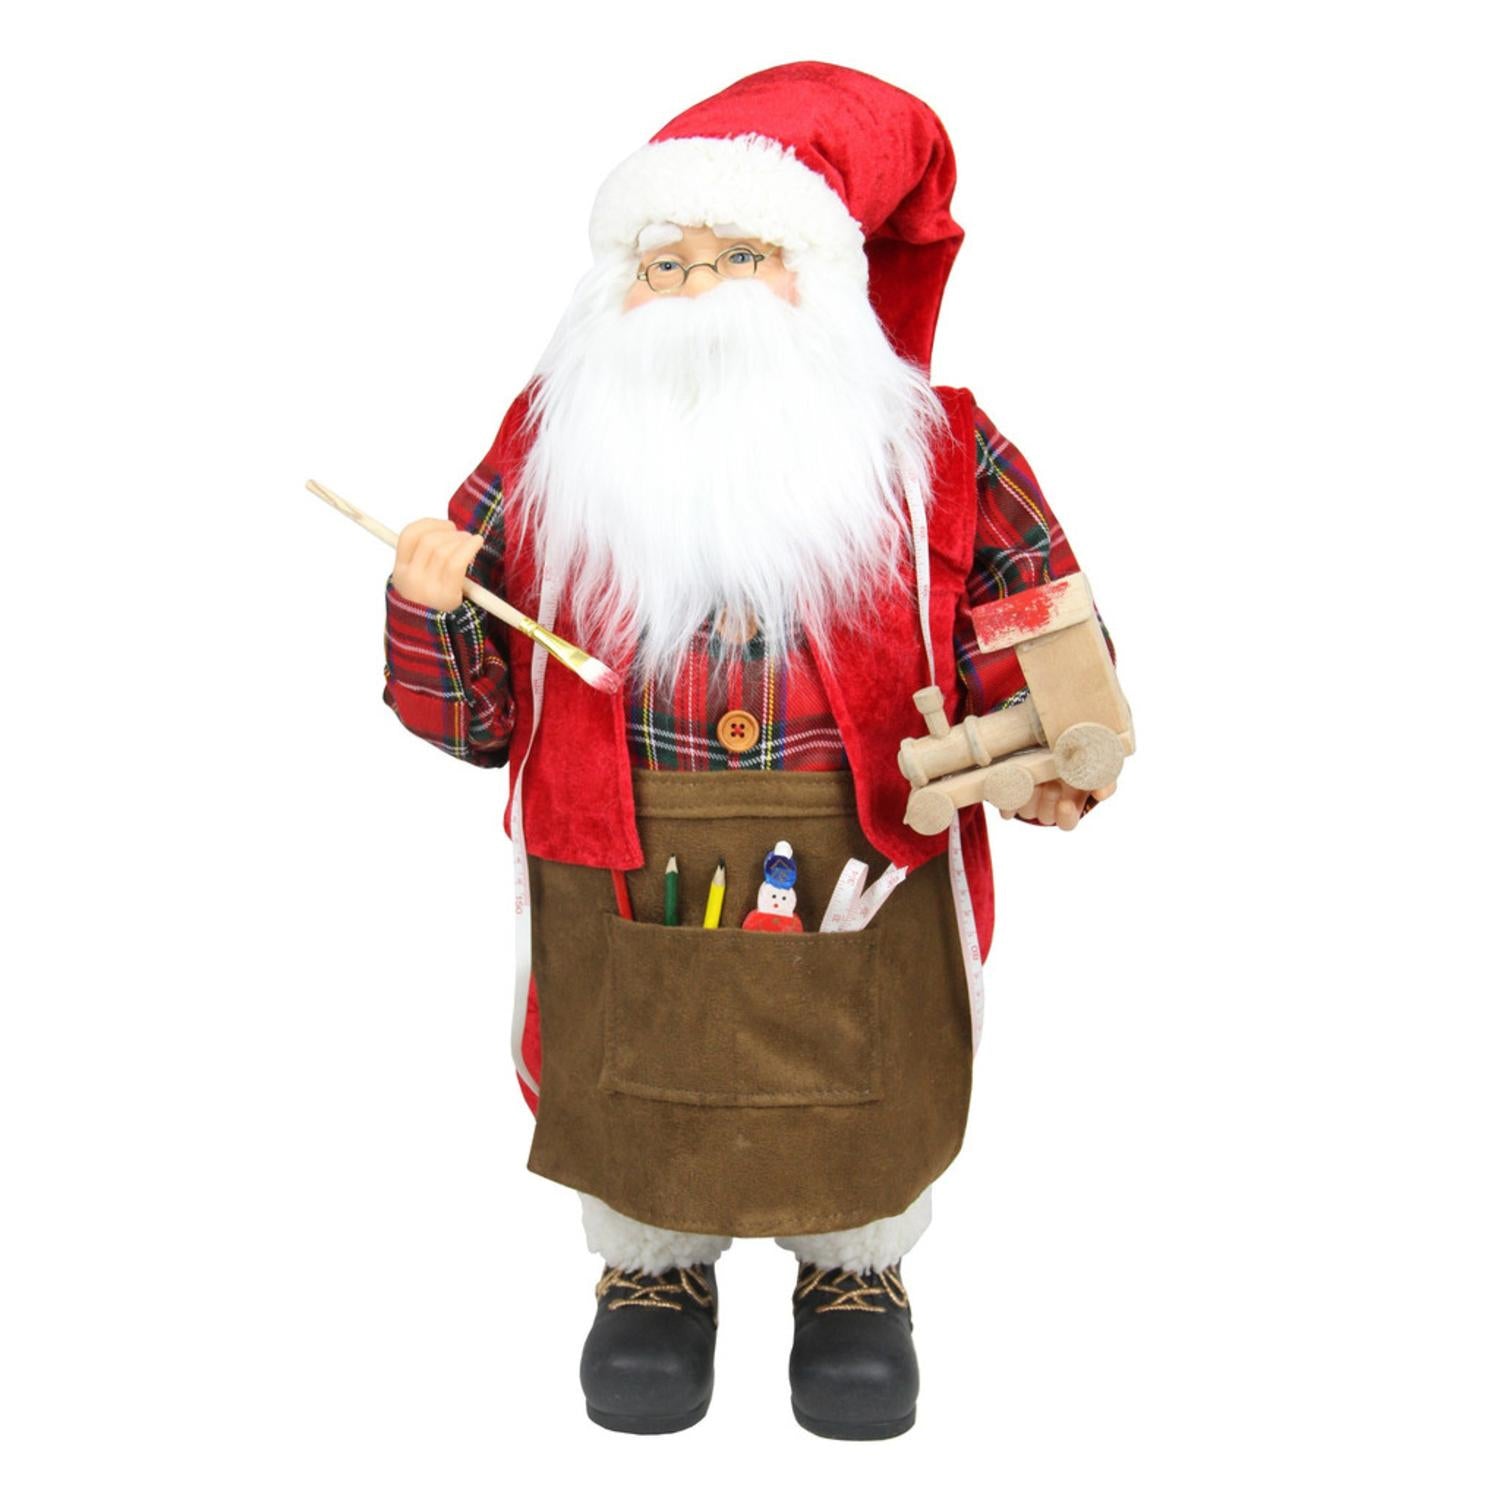 24" Animated Santa Claus Painting a Toy Train Christmas Decoration